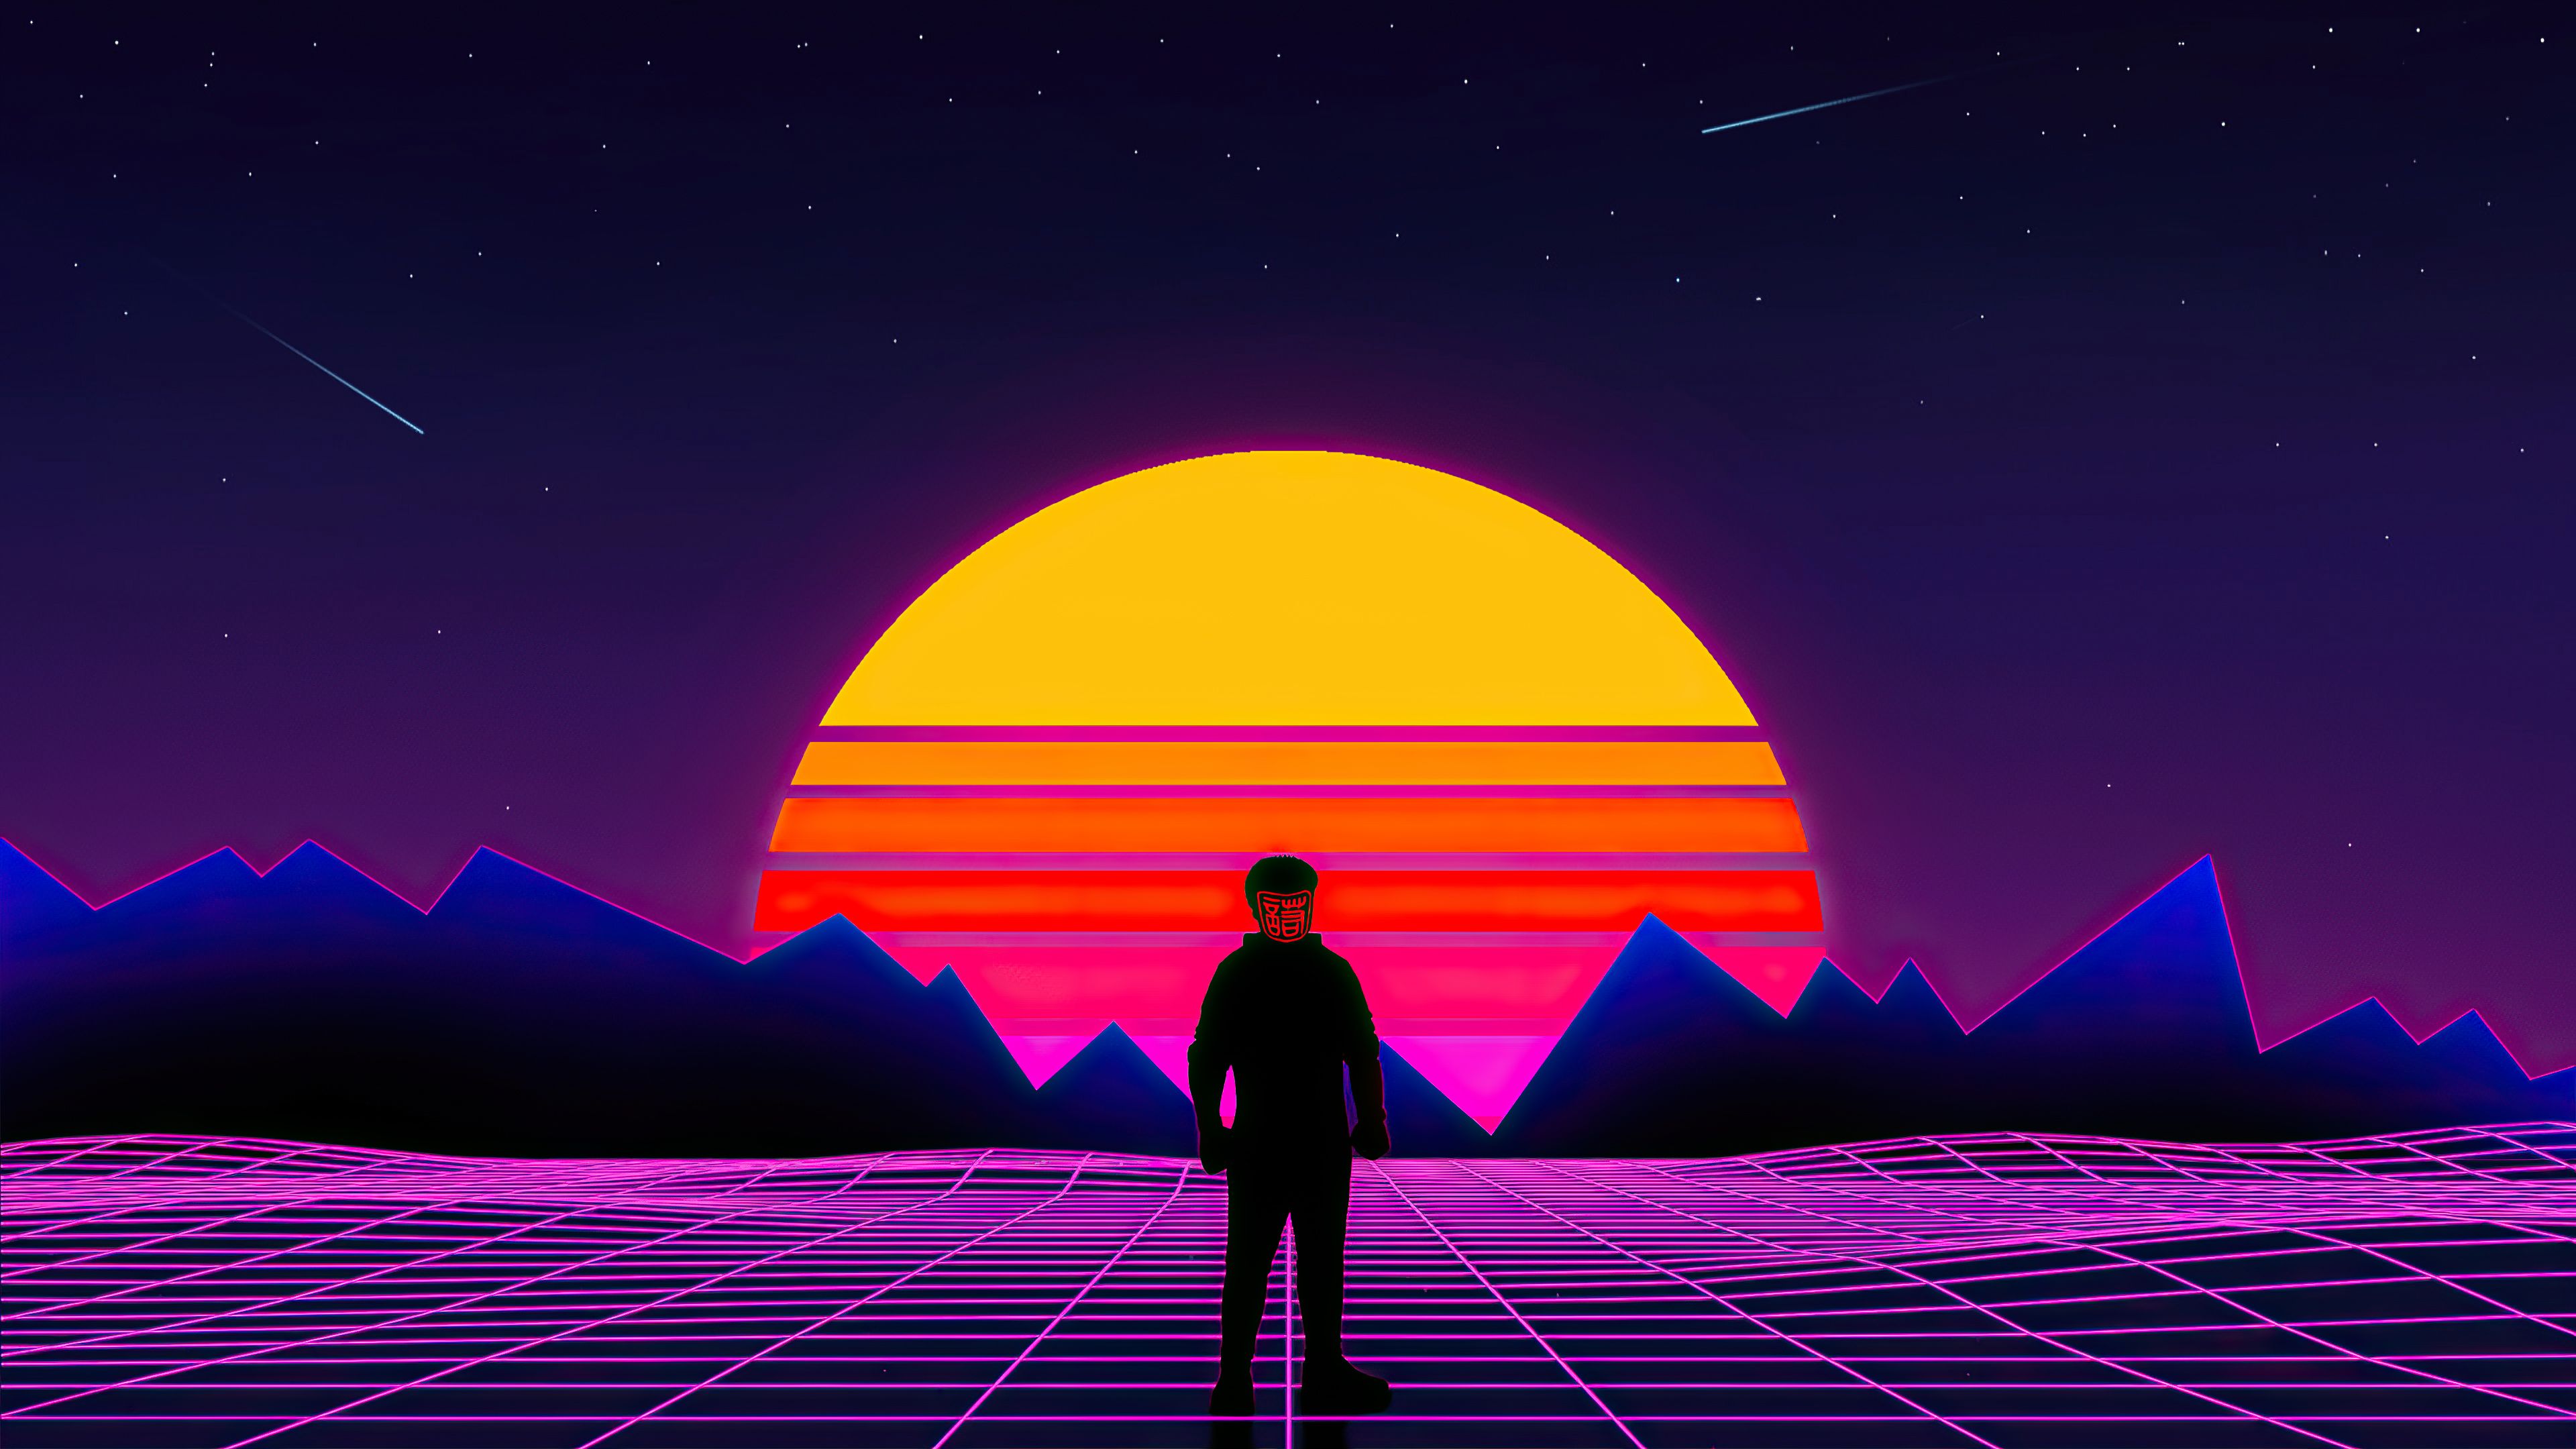 Retro 80s Boy 4k, HD Artist, 4k Wallpaper, Image, Background, Photo and Picture